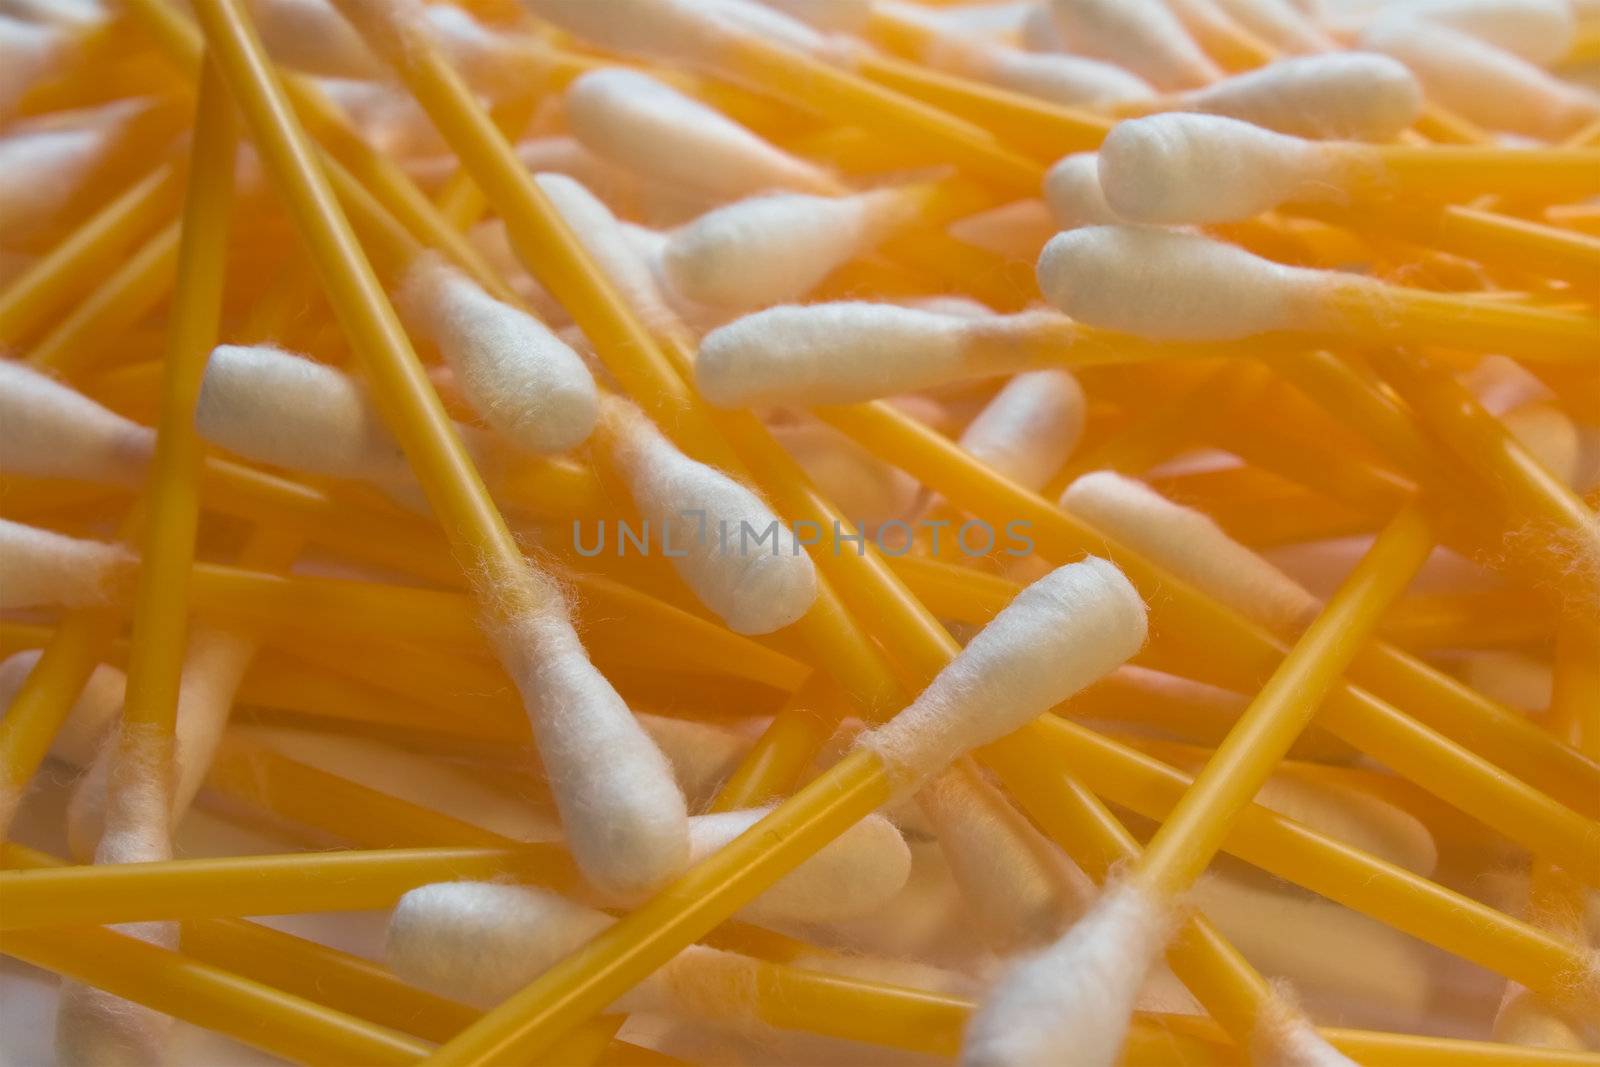 It is a lot of cotton buds, photographed close up